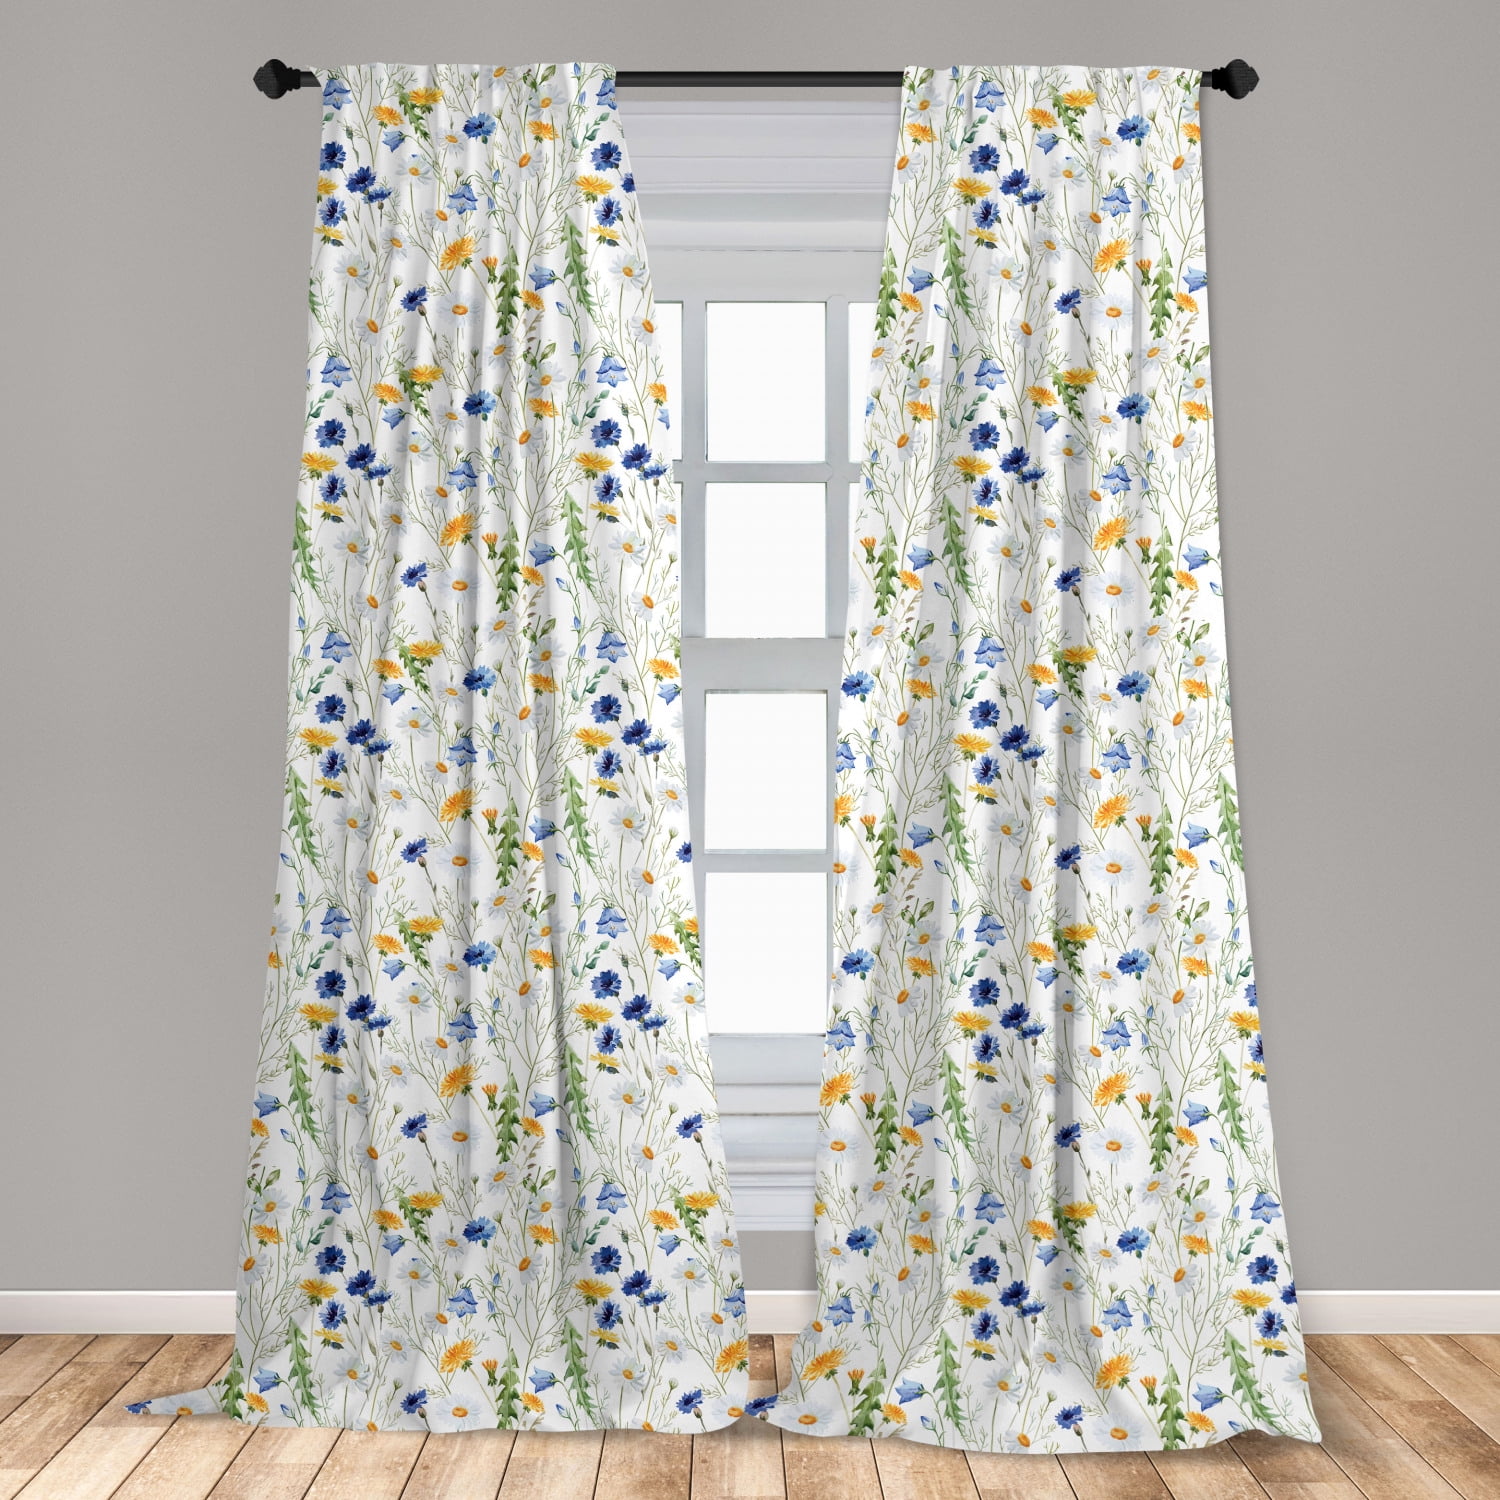 Daisy Floral Valance White Daisies Flowers on Black Cotton Duck Window Curtain